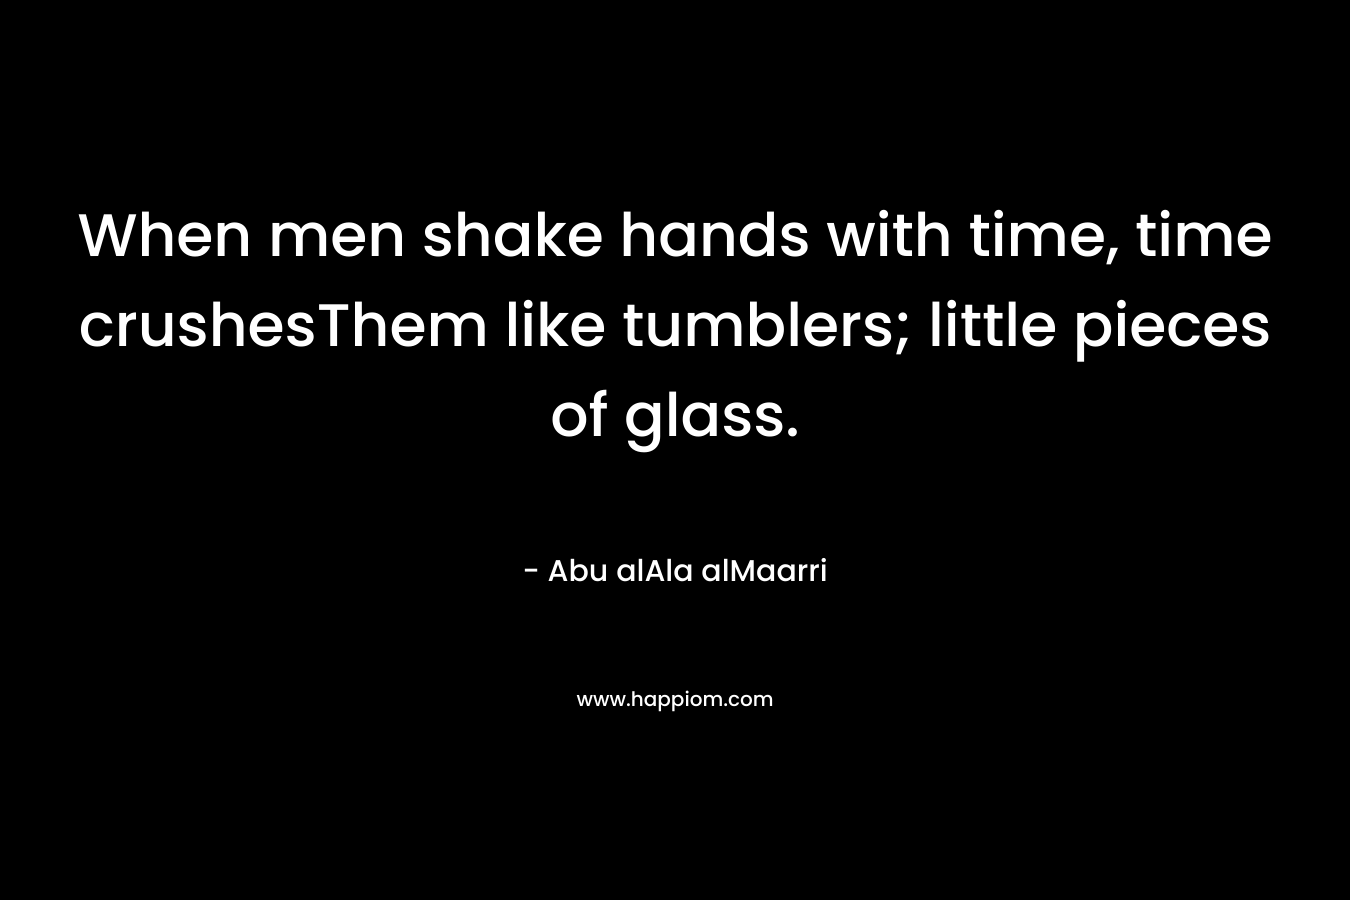 When men shake hands with time, time crushesThem like tumblers; little pieces of glass.